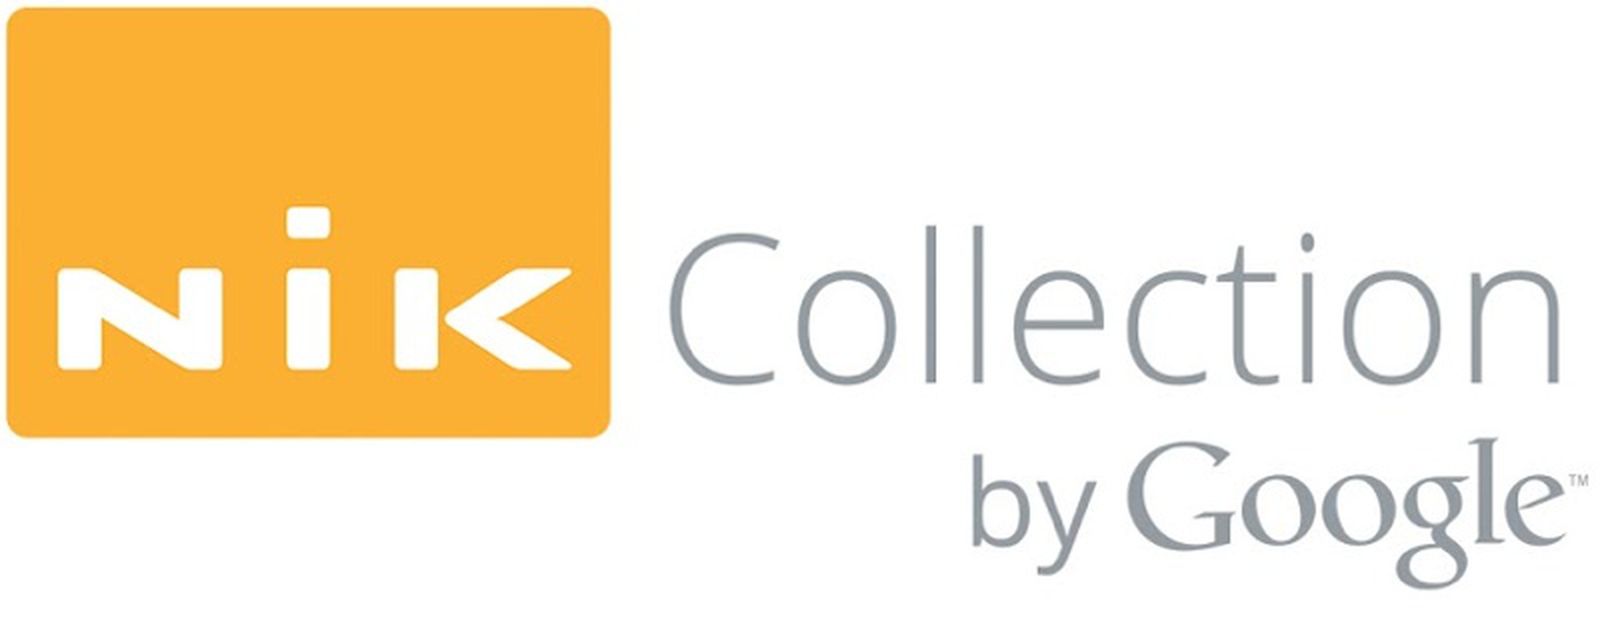 Google Nik collection. Google collections